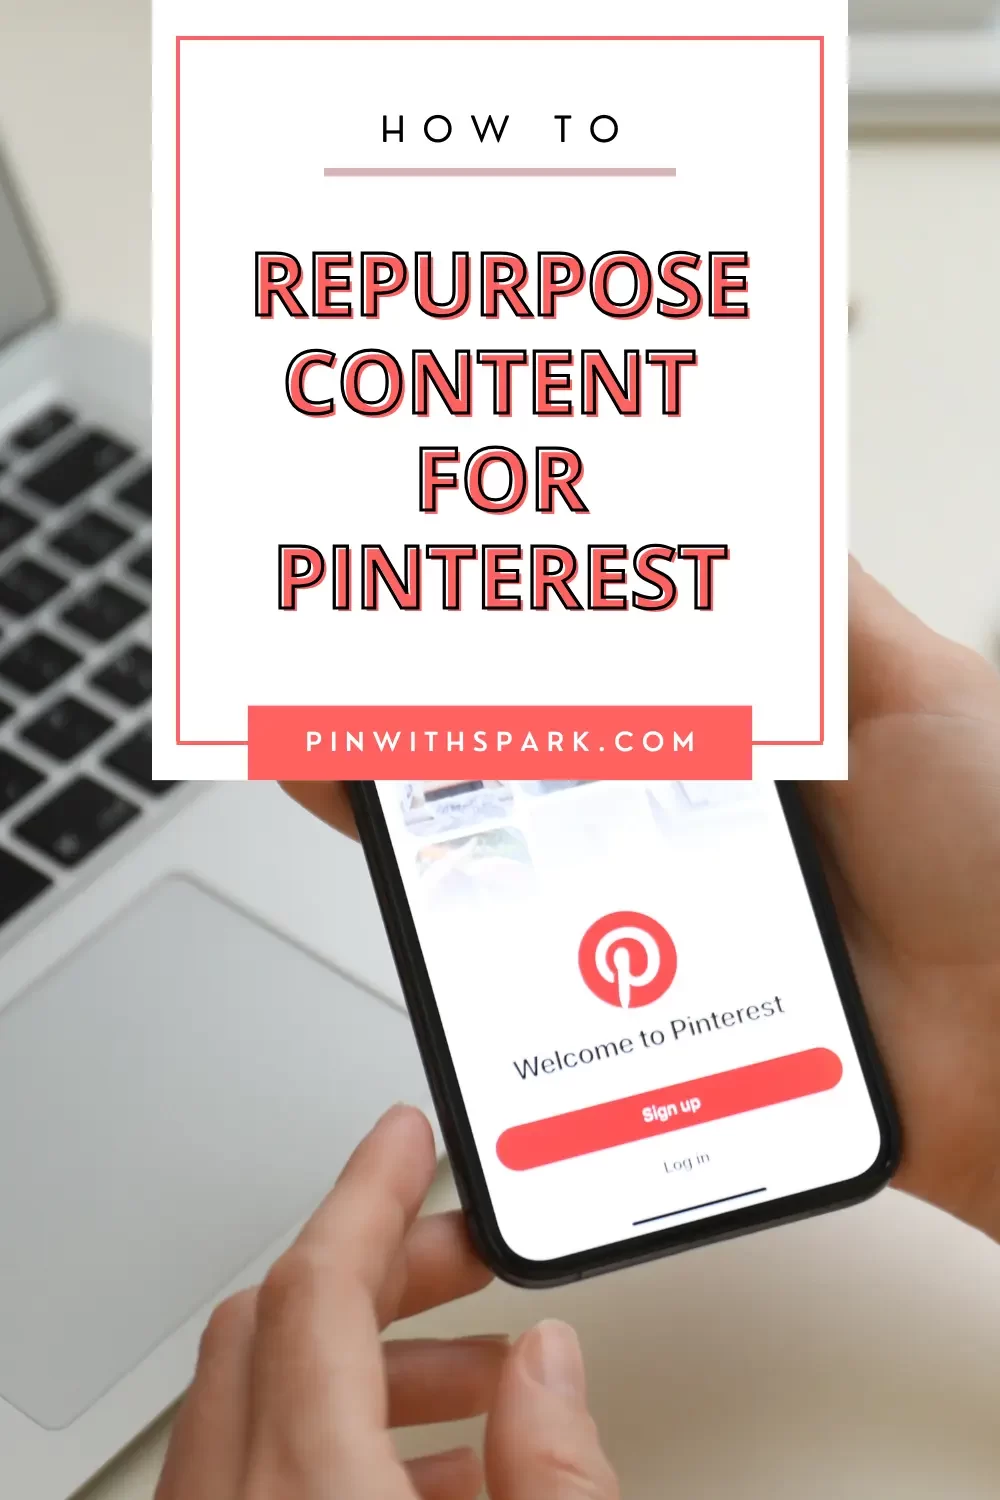 how to repurpose content for Pinterest pinwithspark.com text overlay, image of phone with pinterest login page on phone